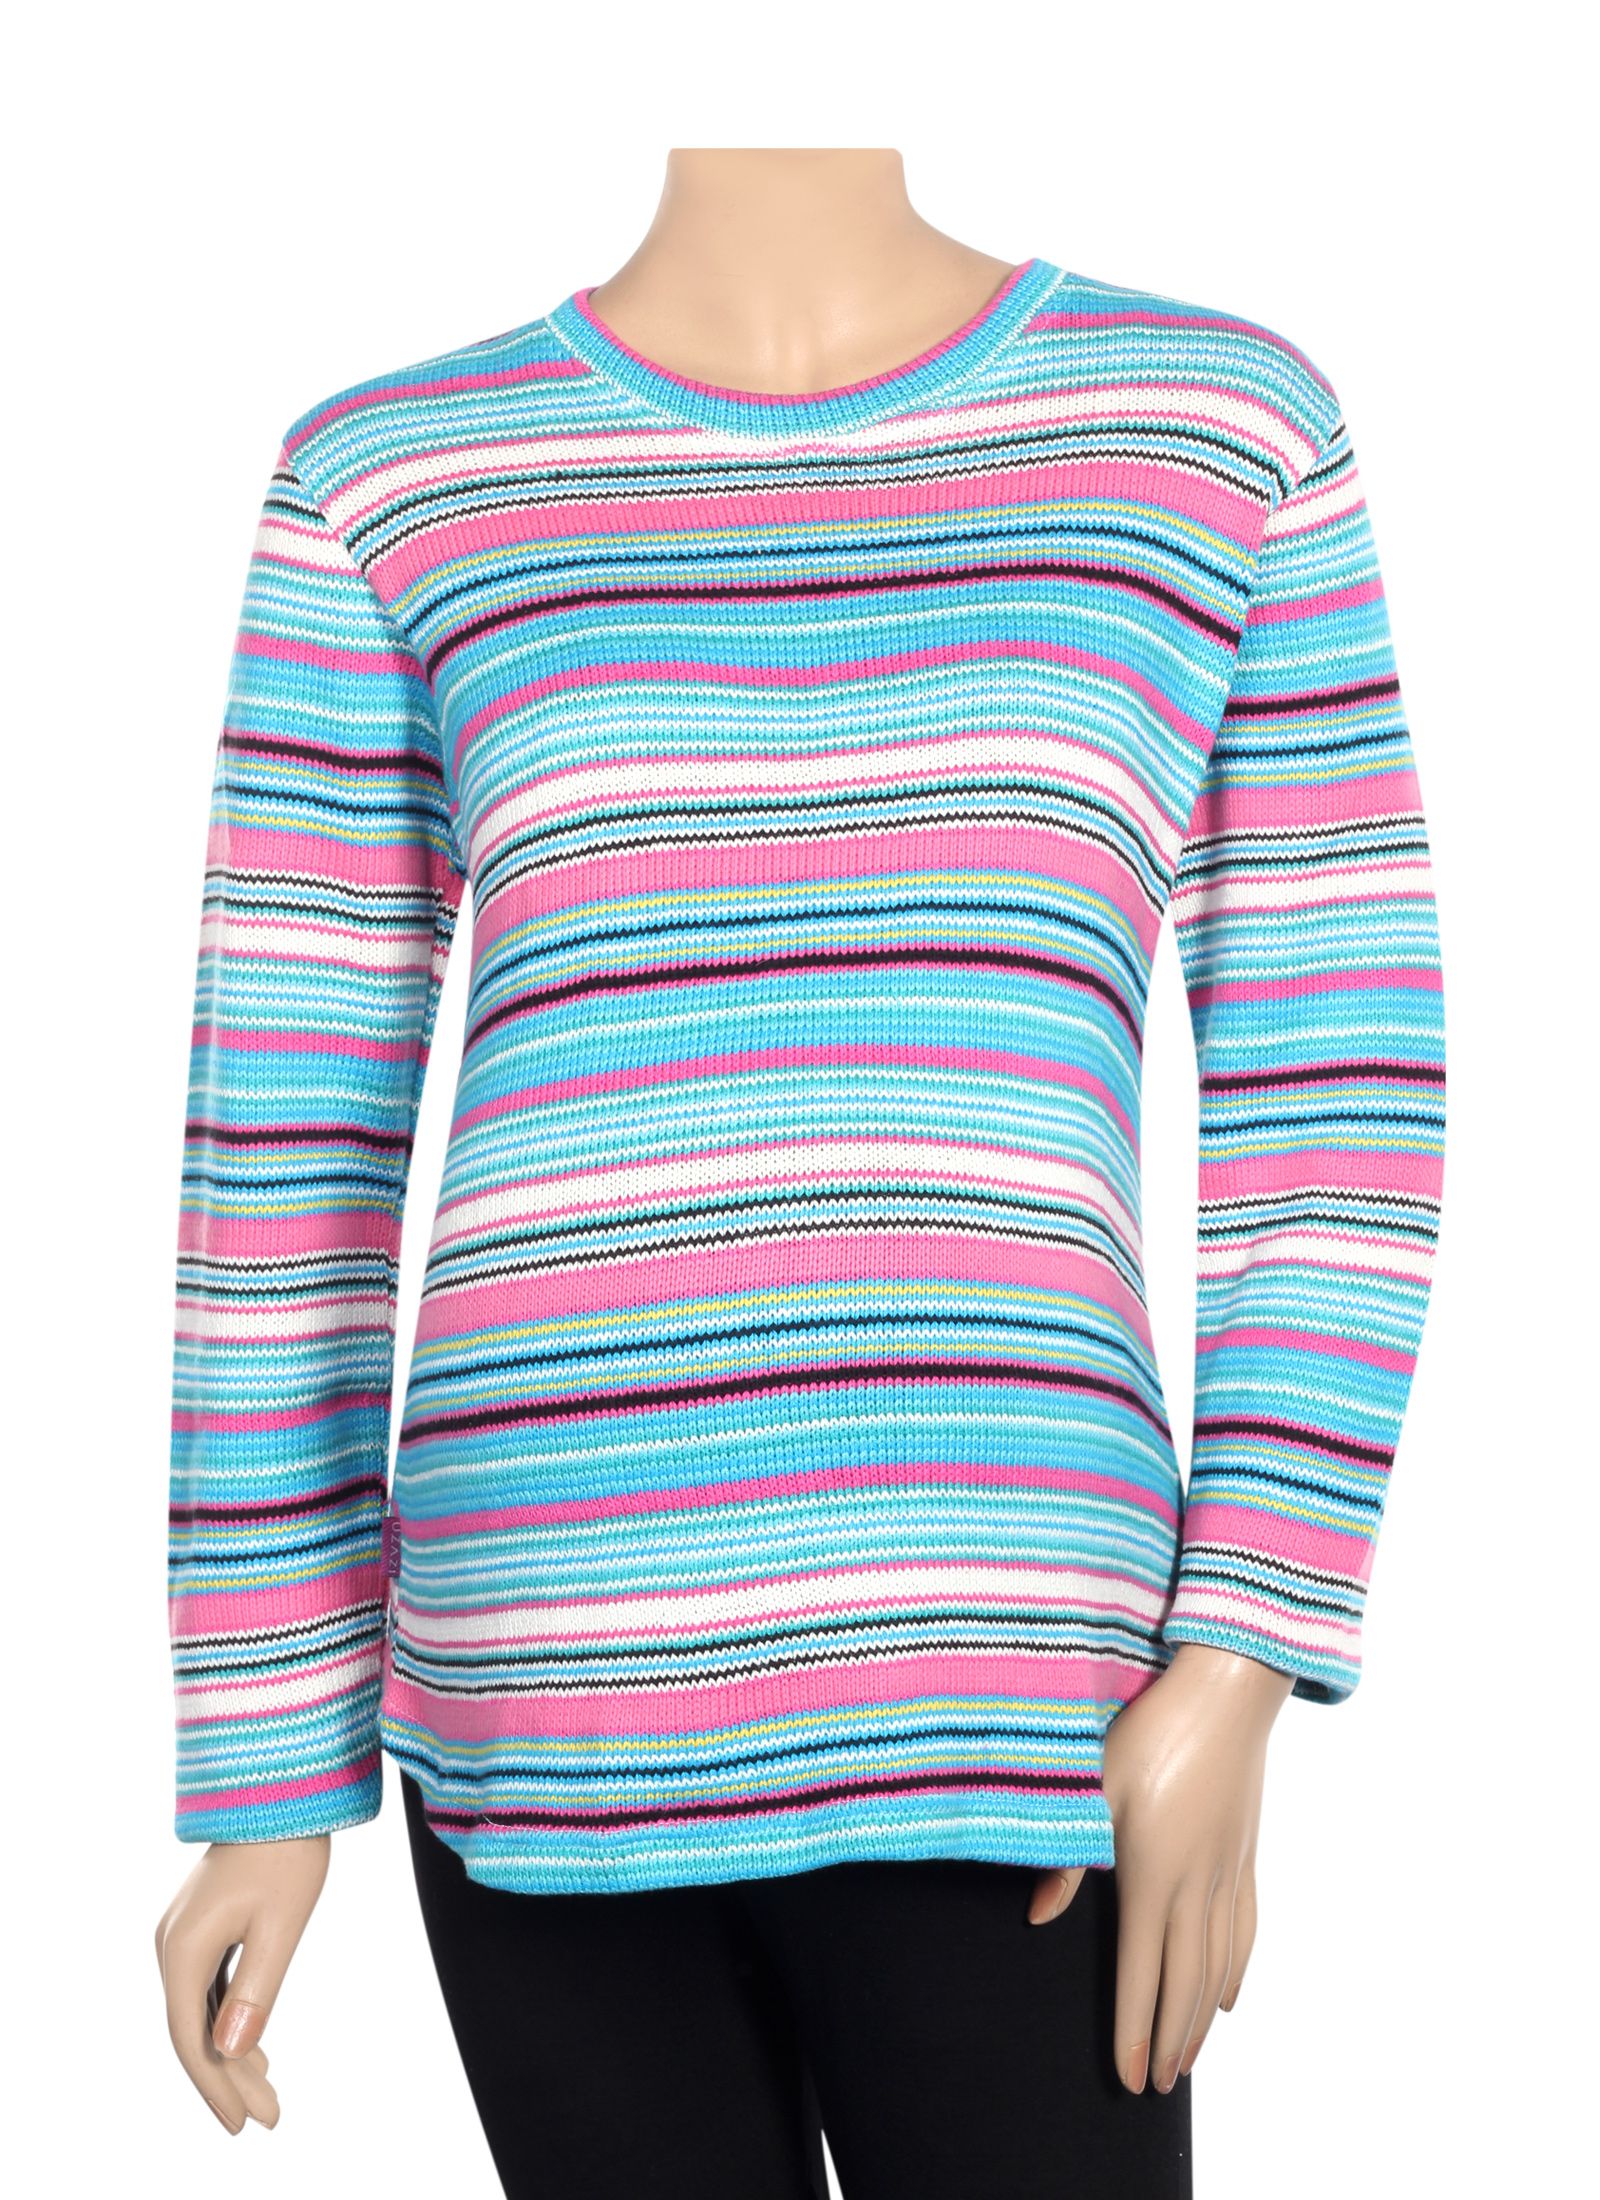 Full Sleeves Sweater - Multiple Color